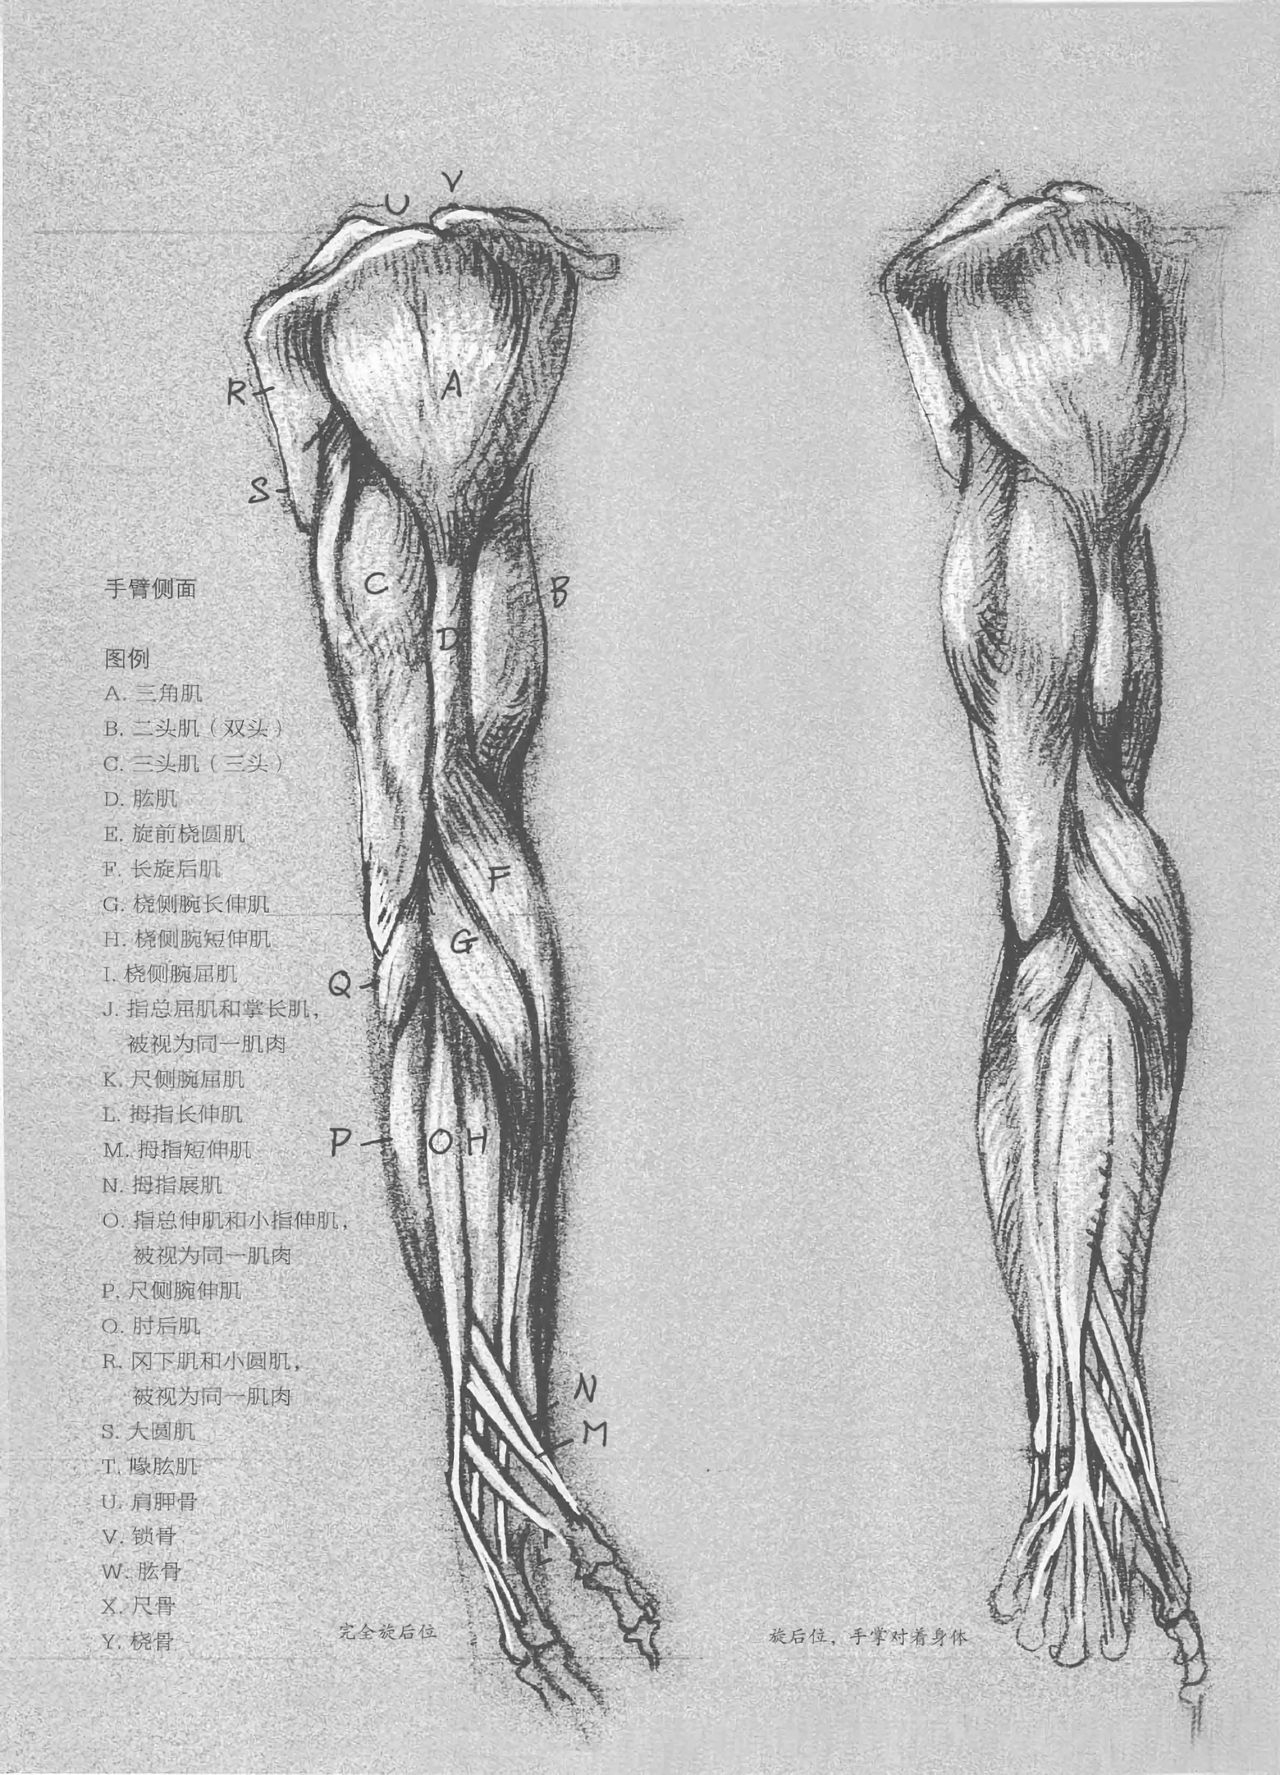 Anatomy-A Complete Guide for Artists - Joseph Sheppard [Chinese] 56